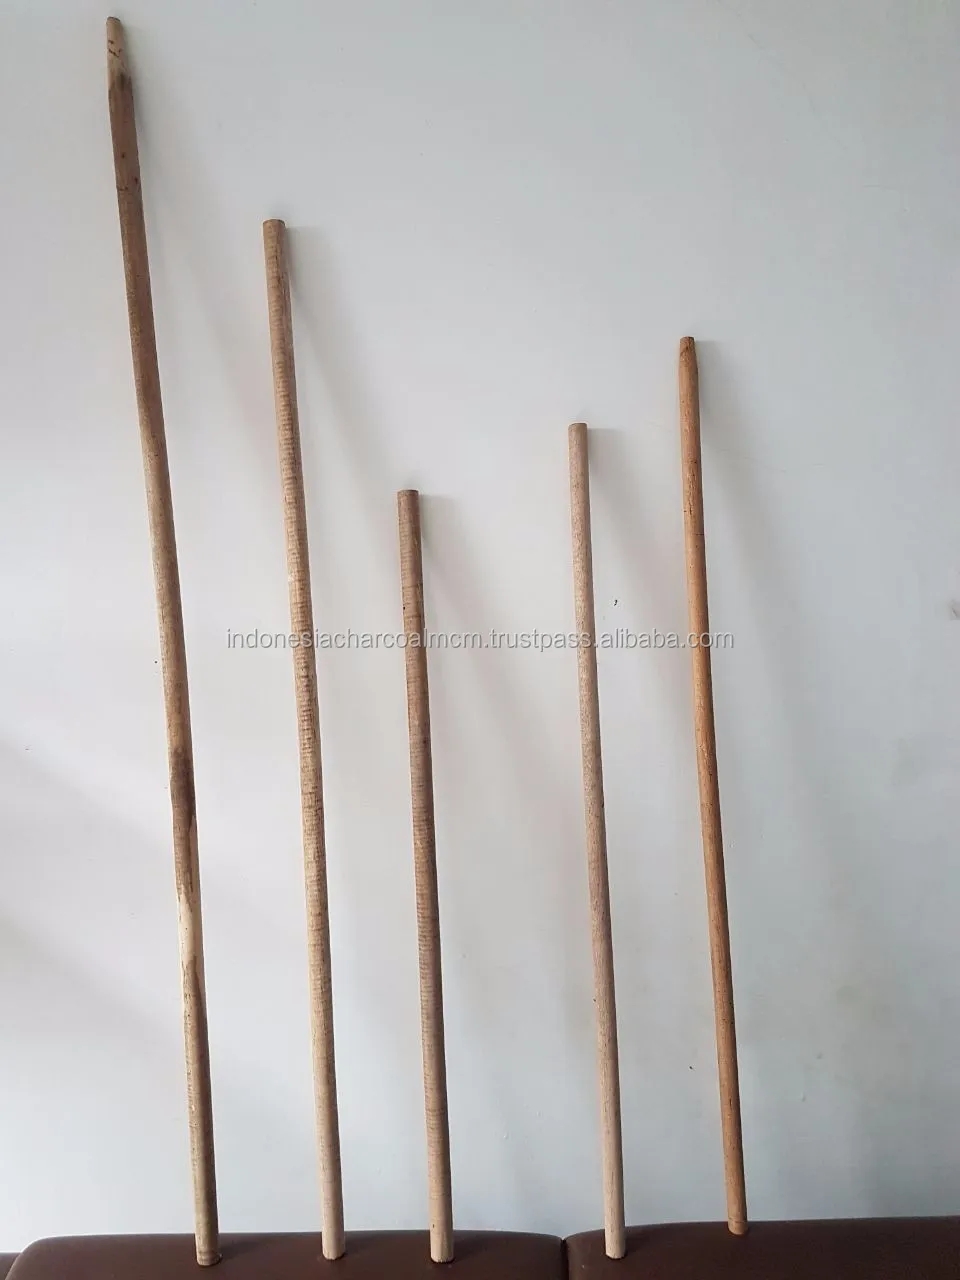 Natural Wooden Broom Stick From Indonesia Buy Indian